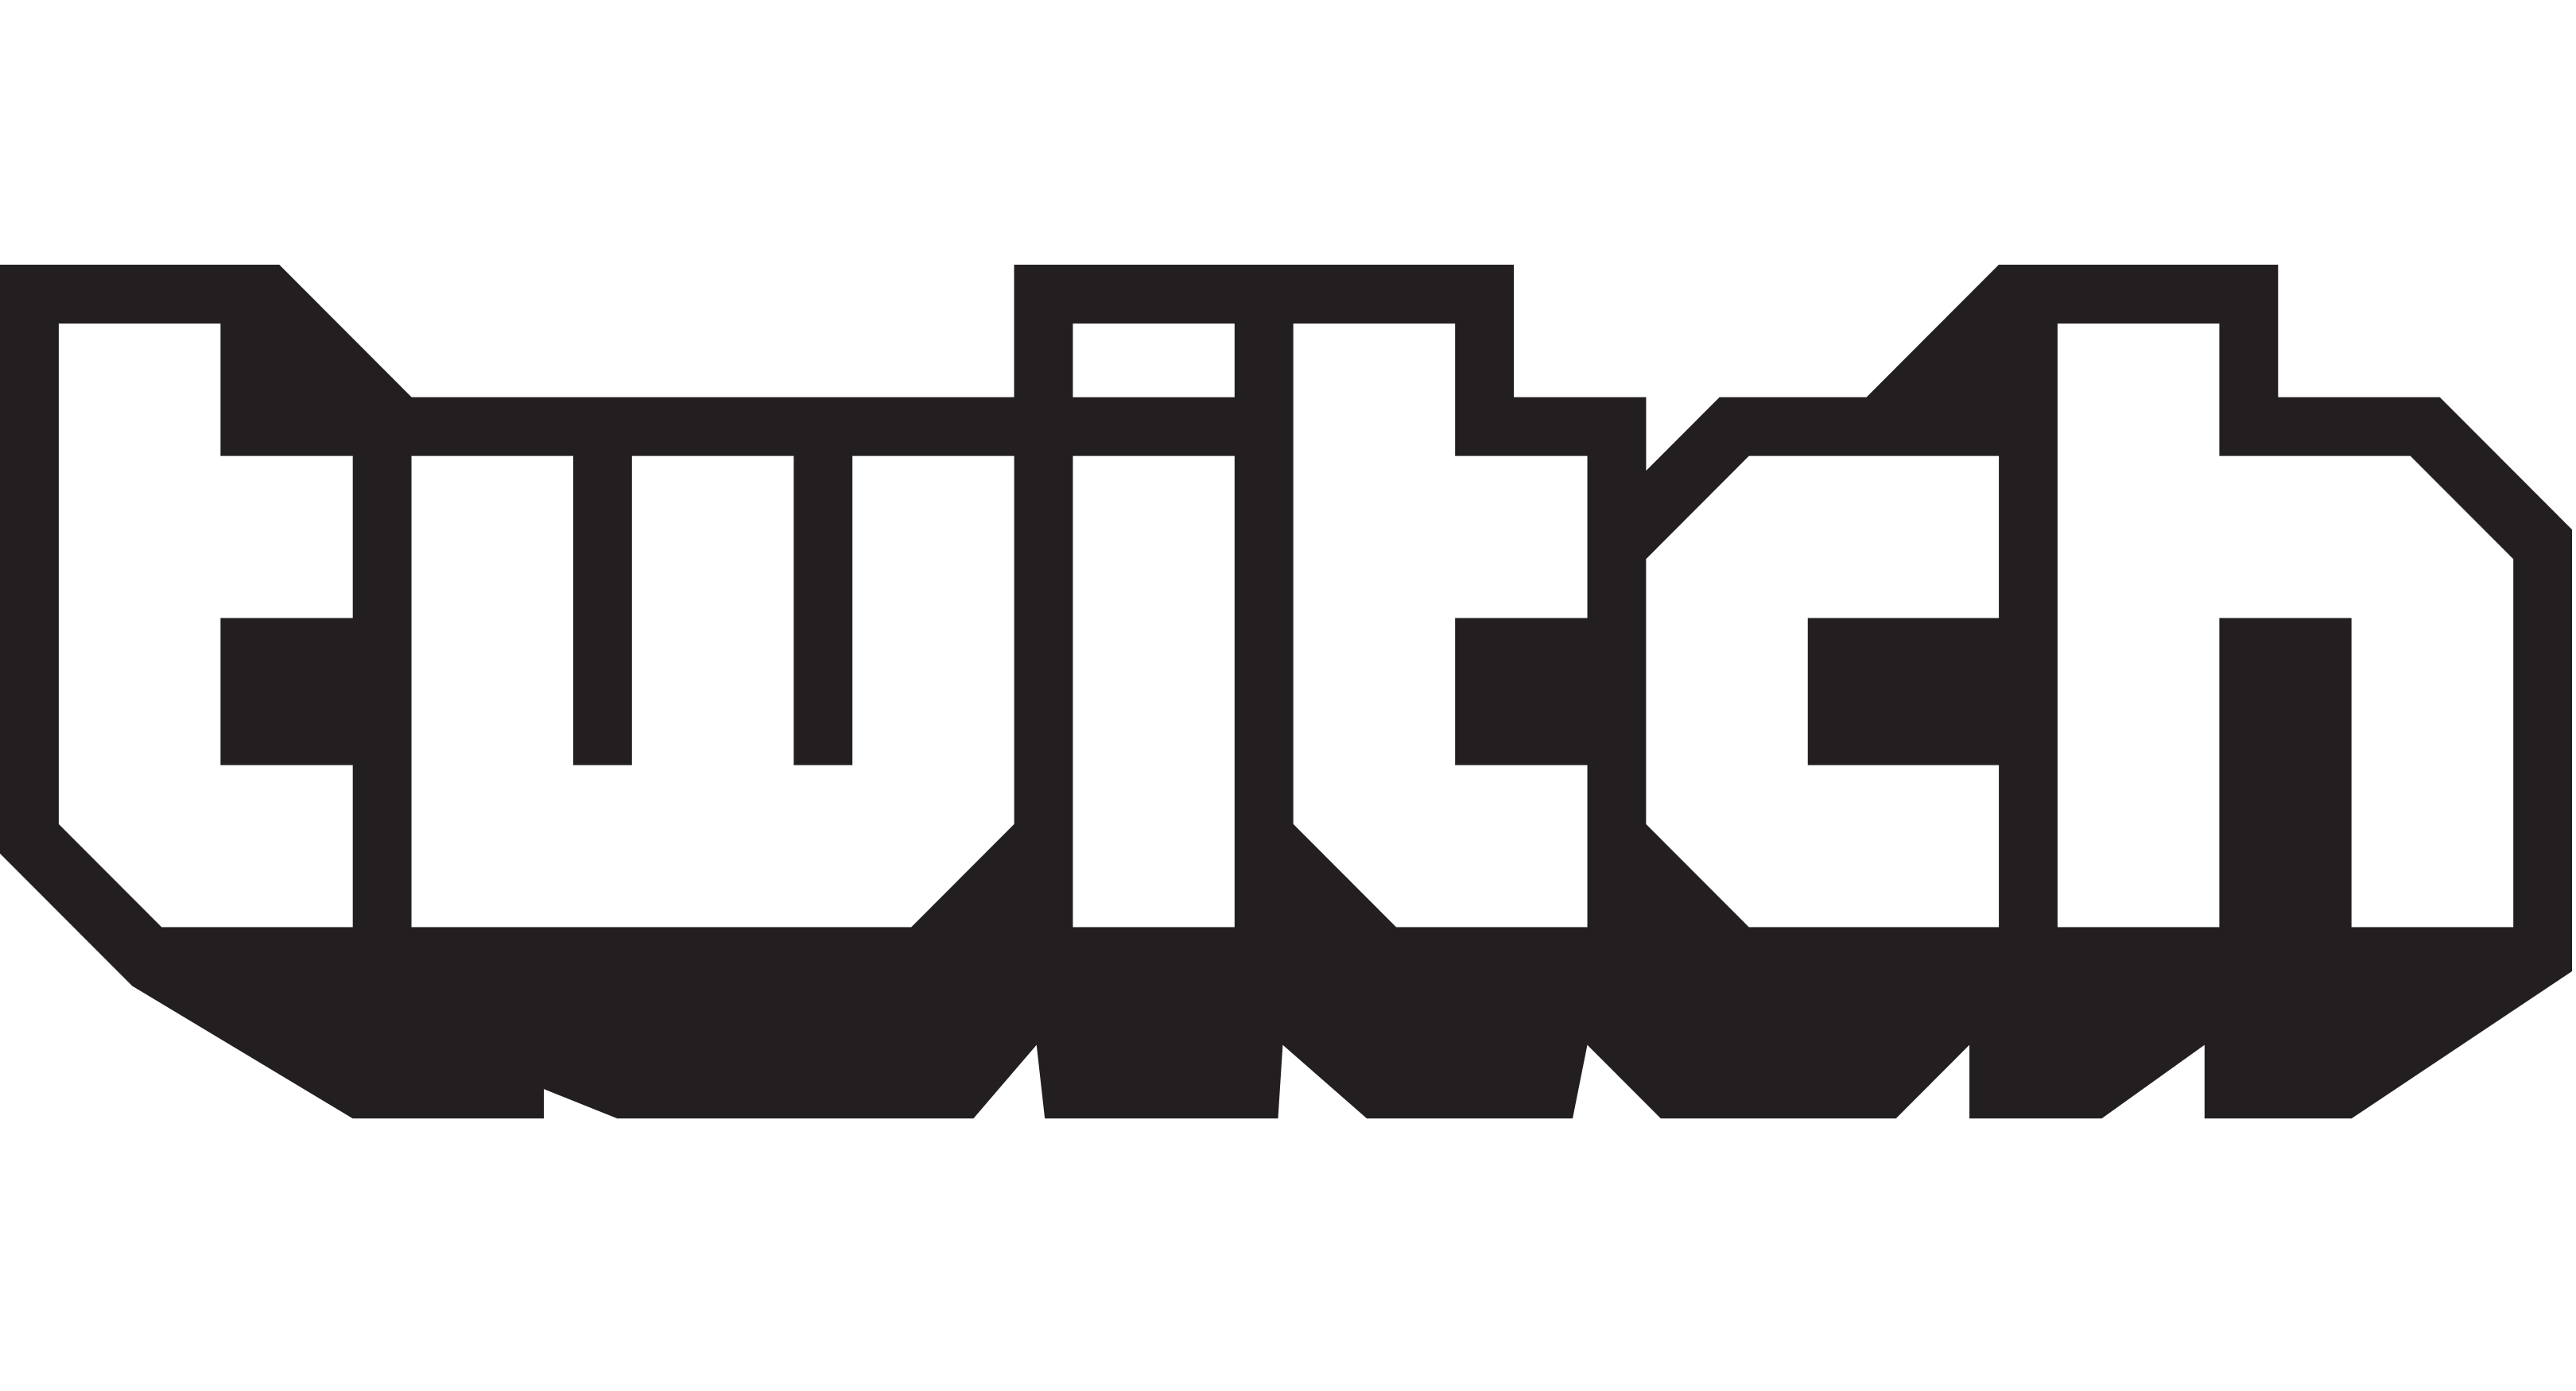 Twitch Wants to Expand Where YouTube is Failing: Monetization